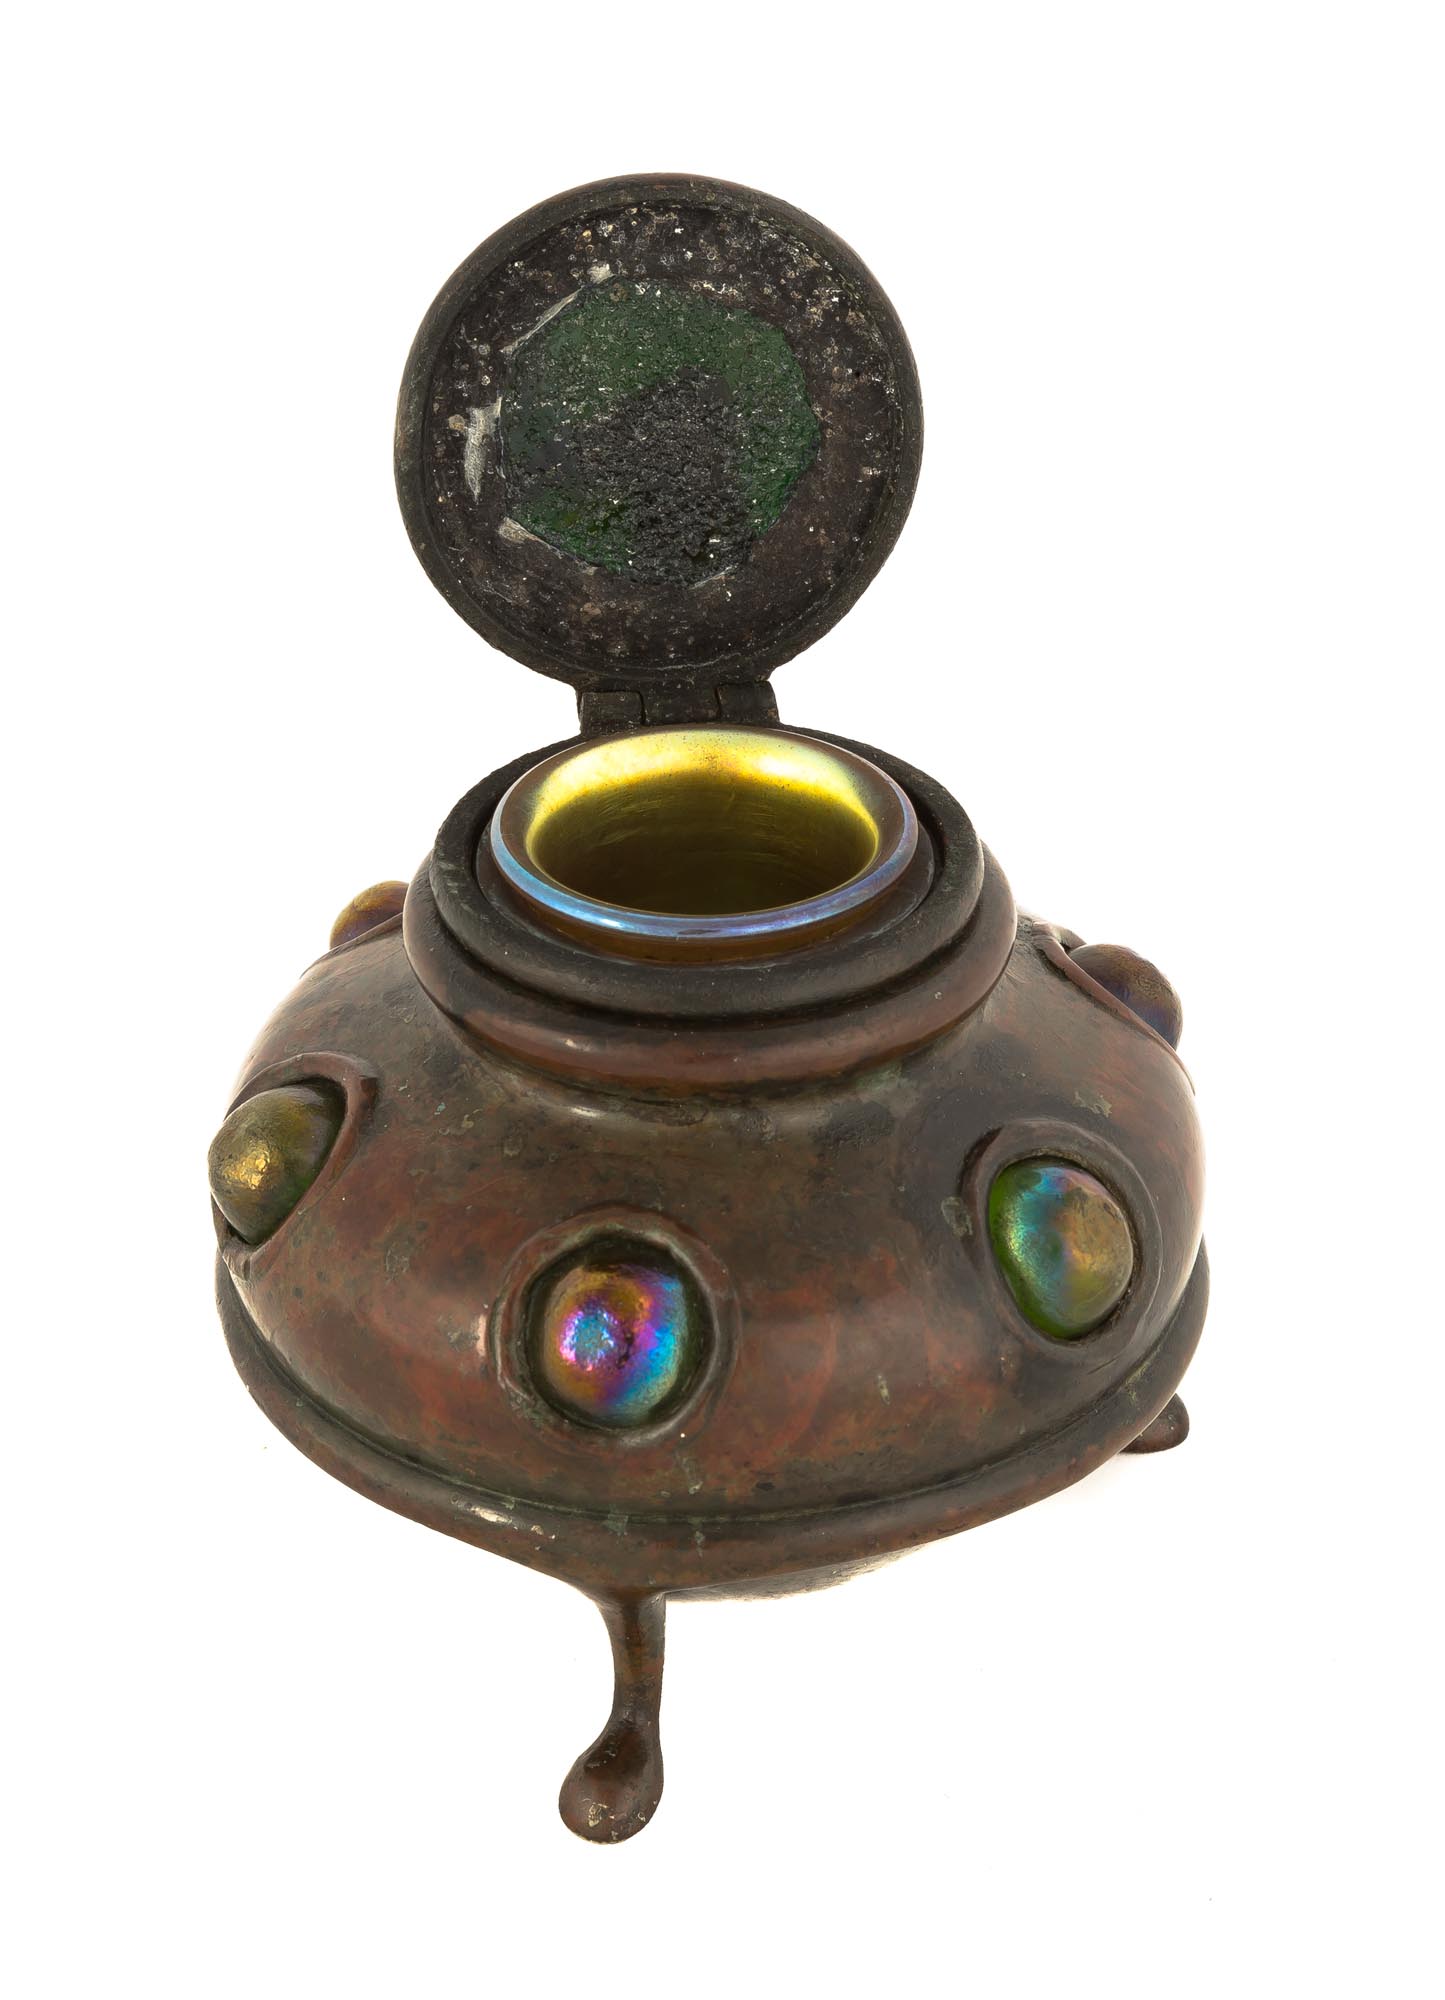 Tiffany Studios, New York, Bronze Inkwell with Turtle Backs and Cabochons. Early 20th century. - Image 2 of 2